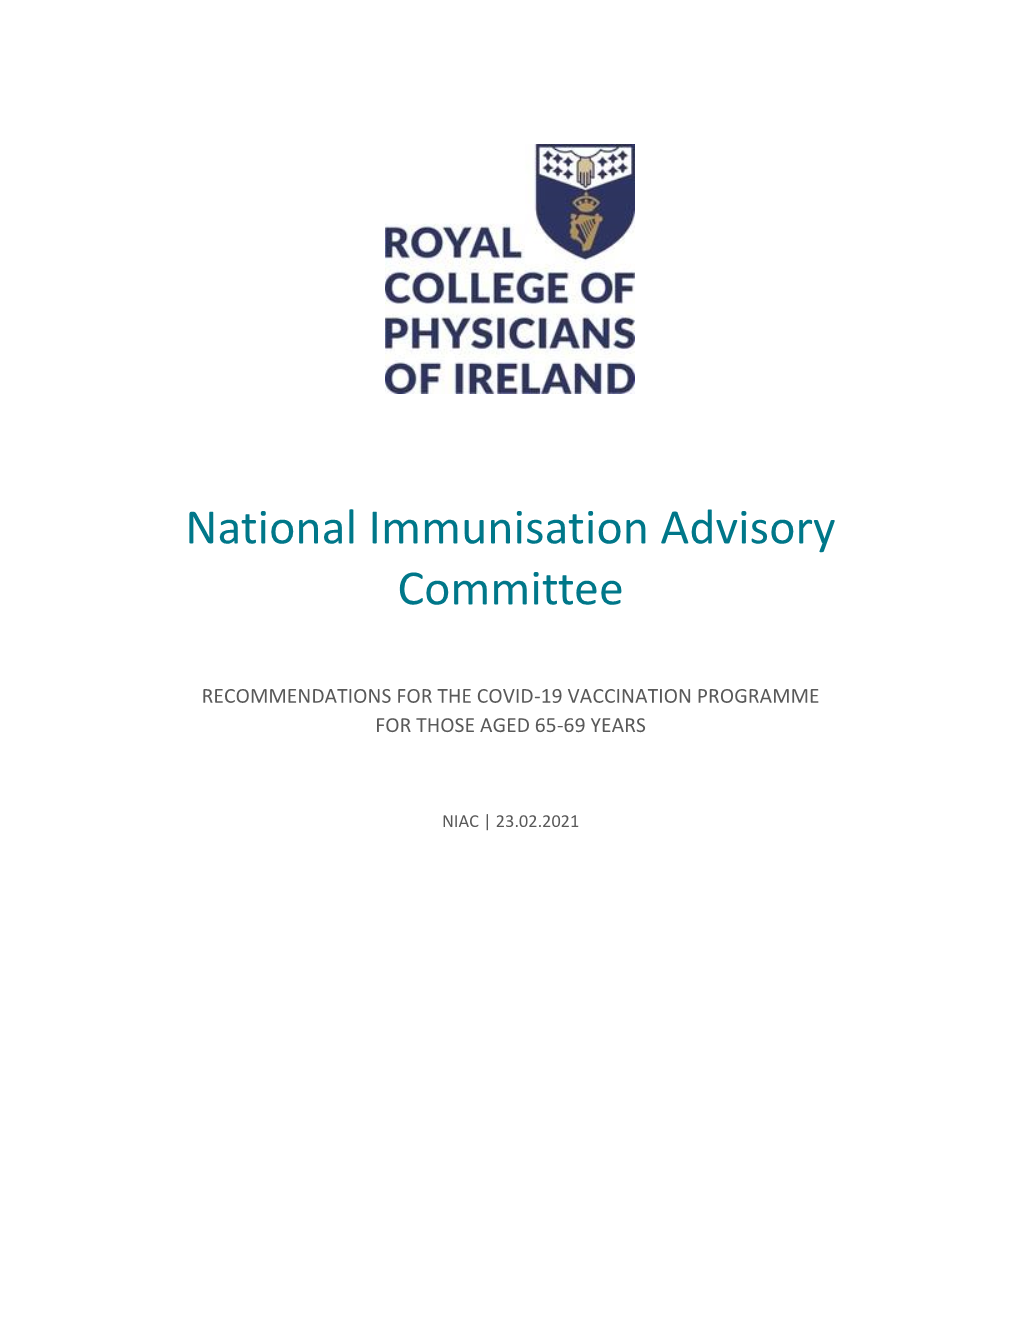 Recommendations for the Covid-19 Vaccination Programme for Those Aged 65-69 Years